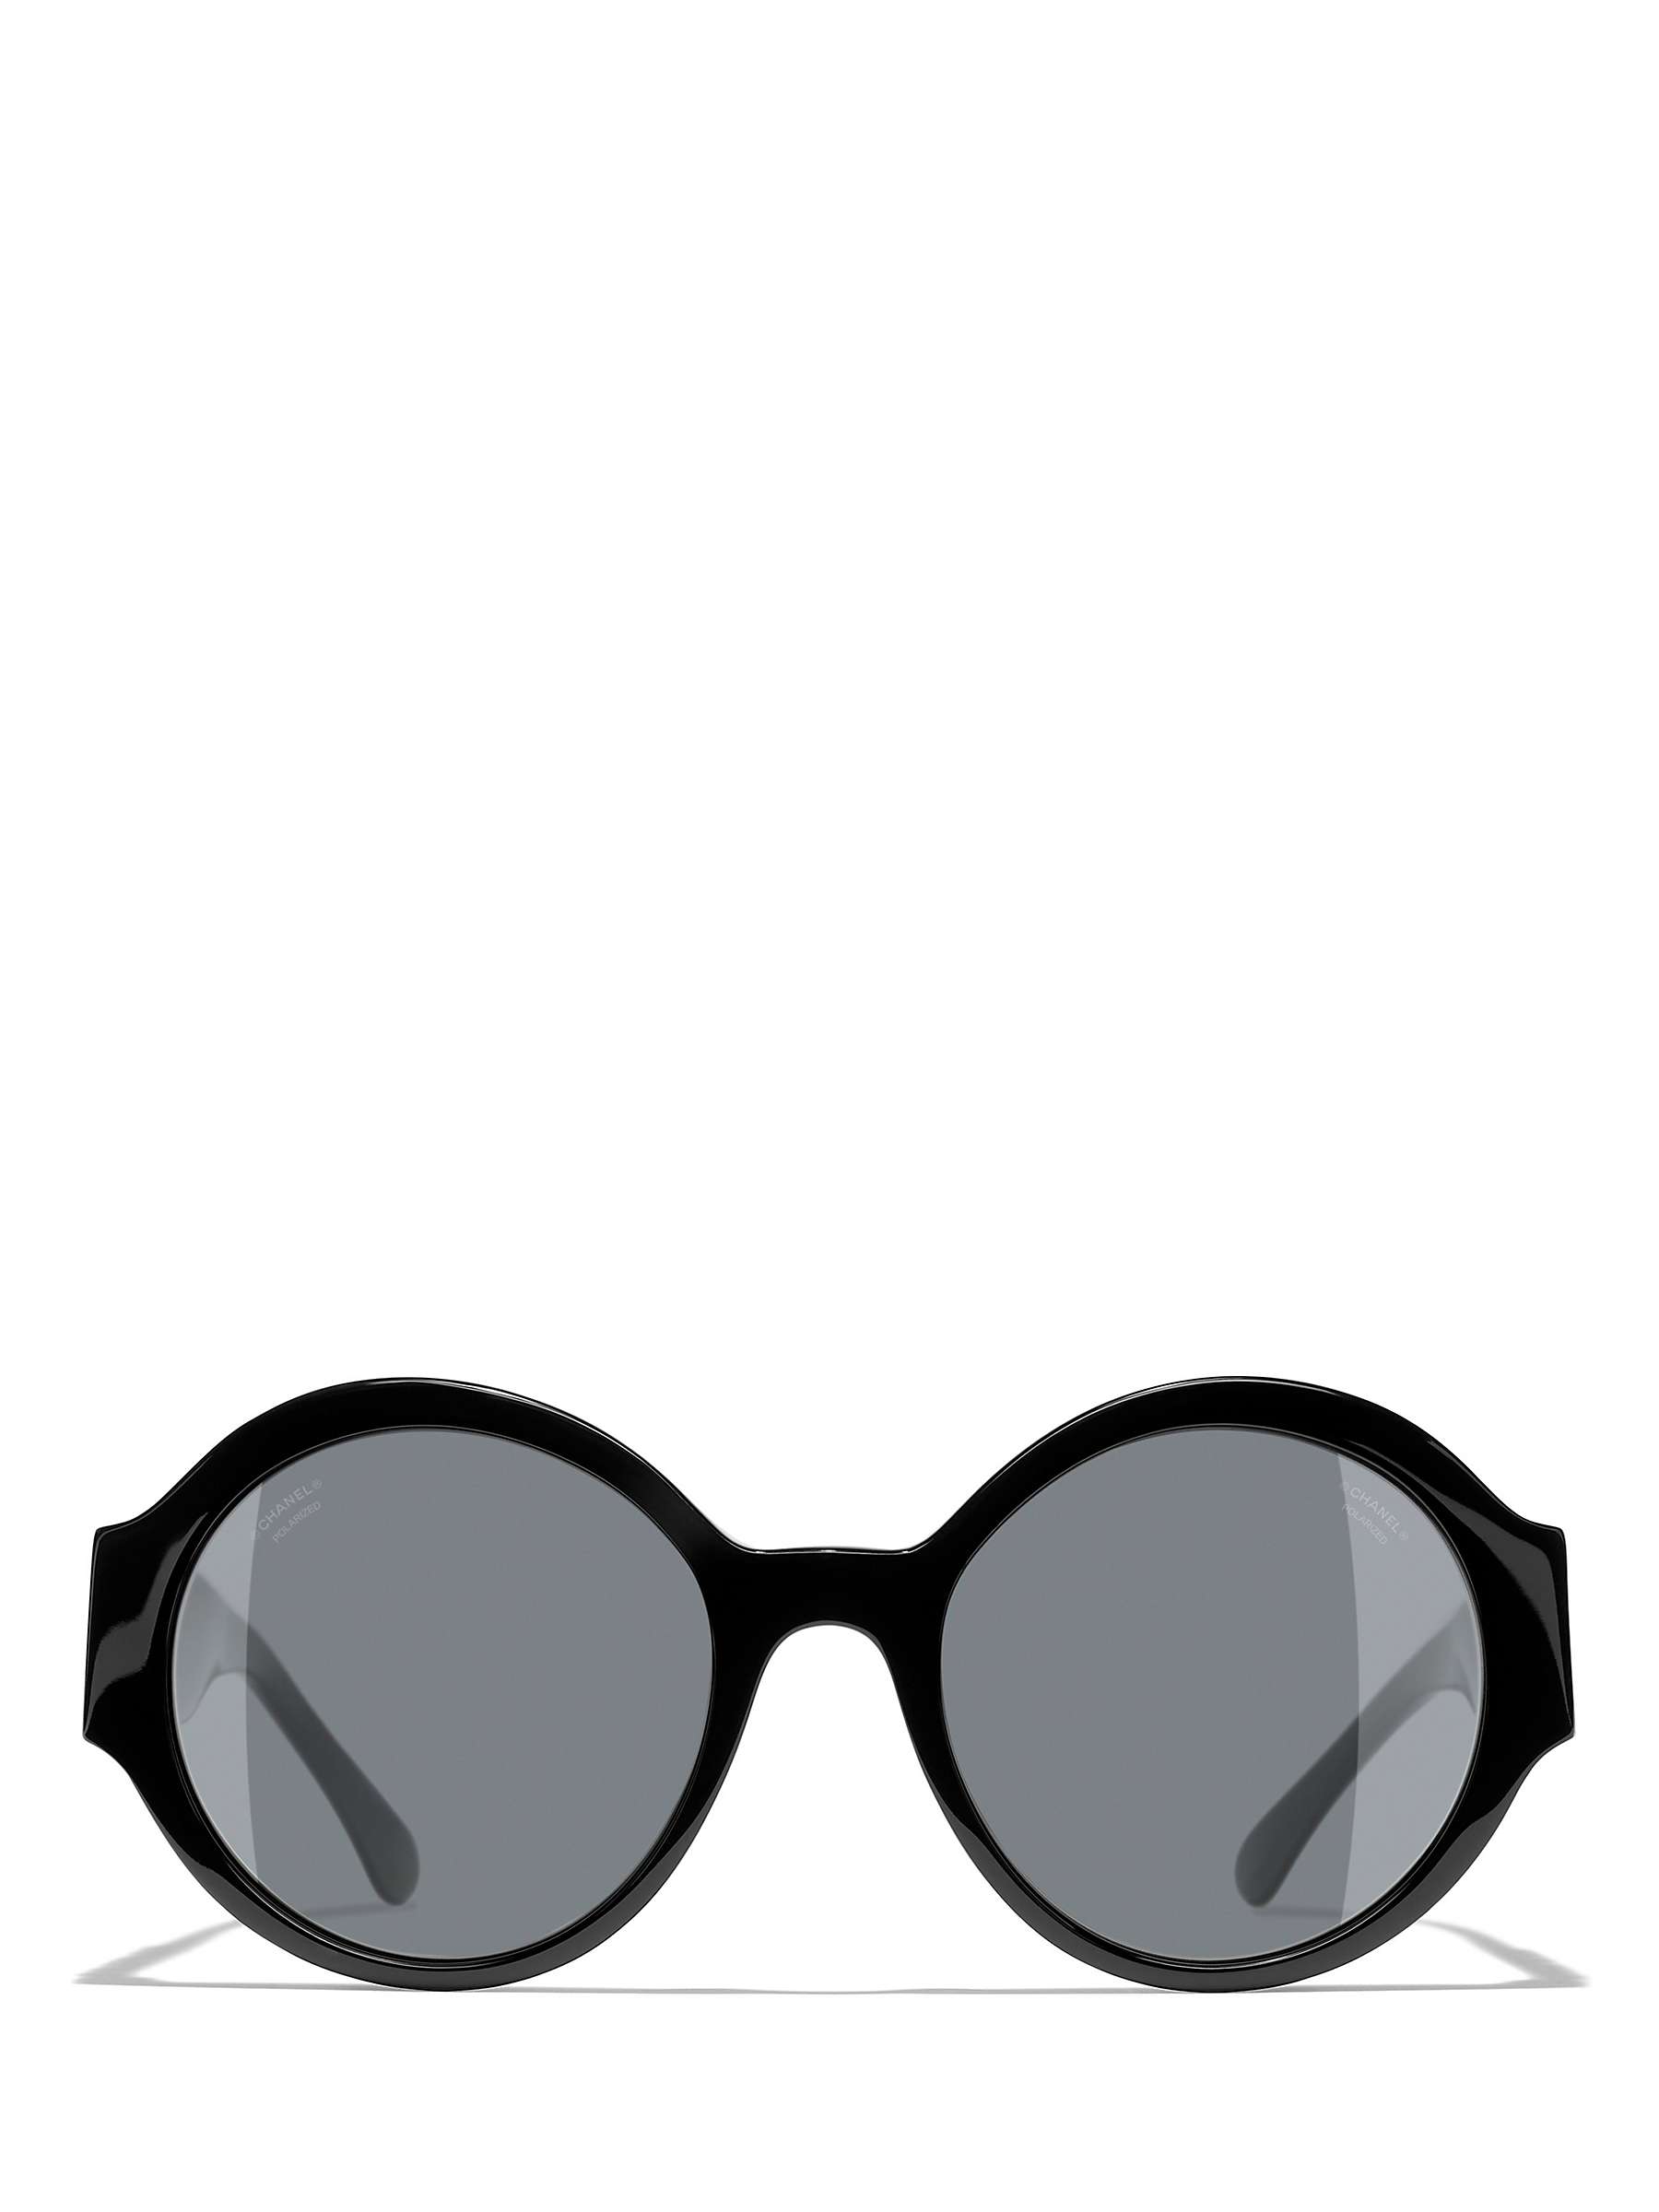 Buy CHANEL Oval Sunglasses CH5410 Black/Grey Online at johnlewis.com